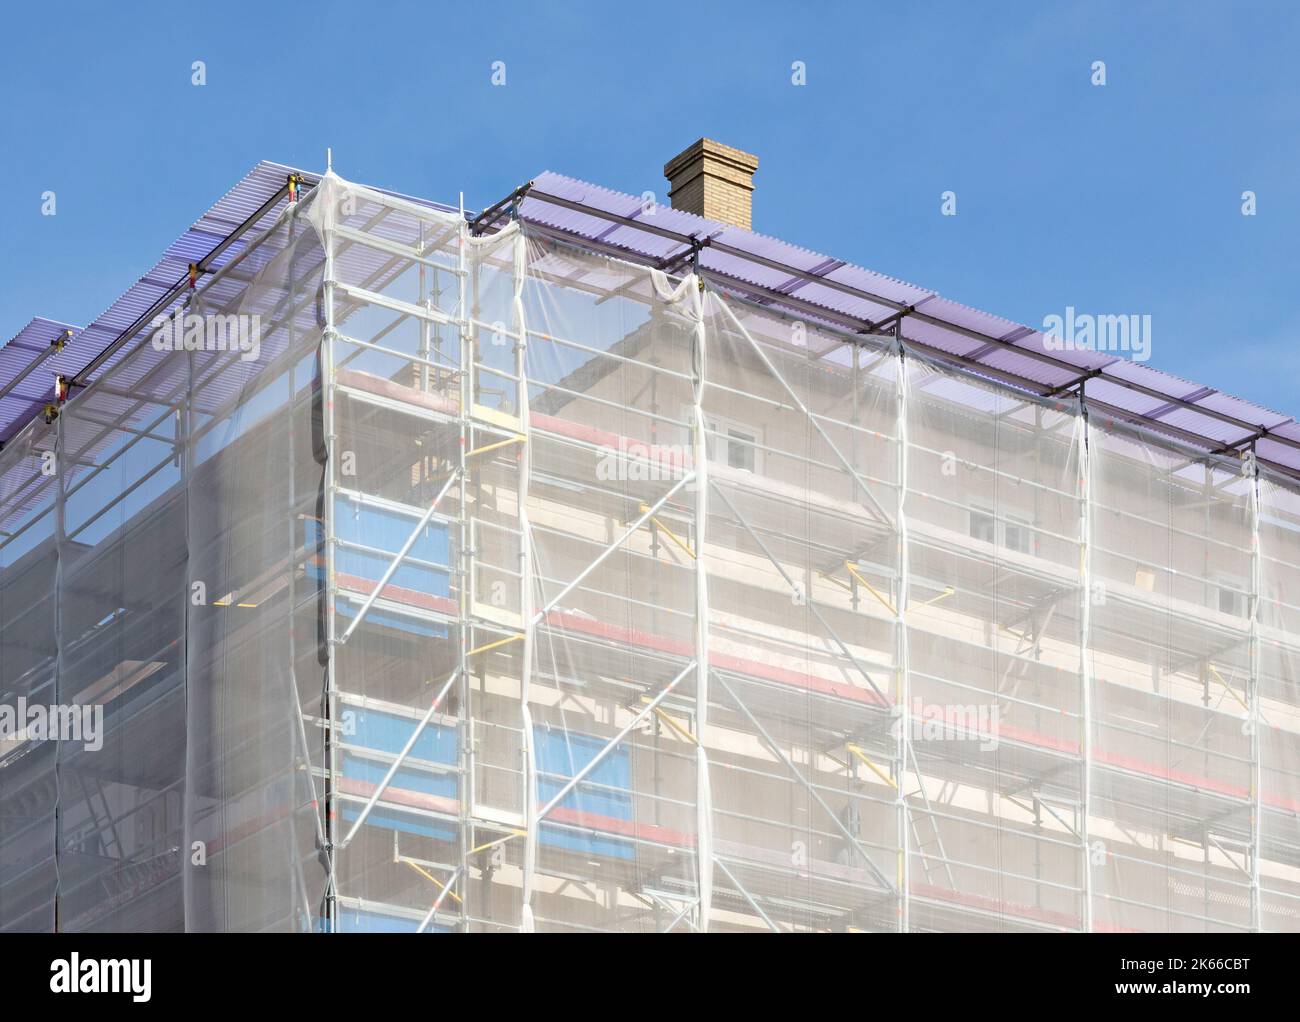 Scaffolding on house facade (with netting), apartment builing under construction Stock Photo